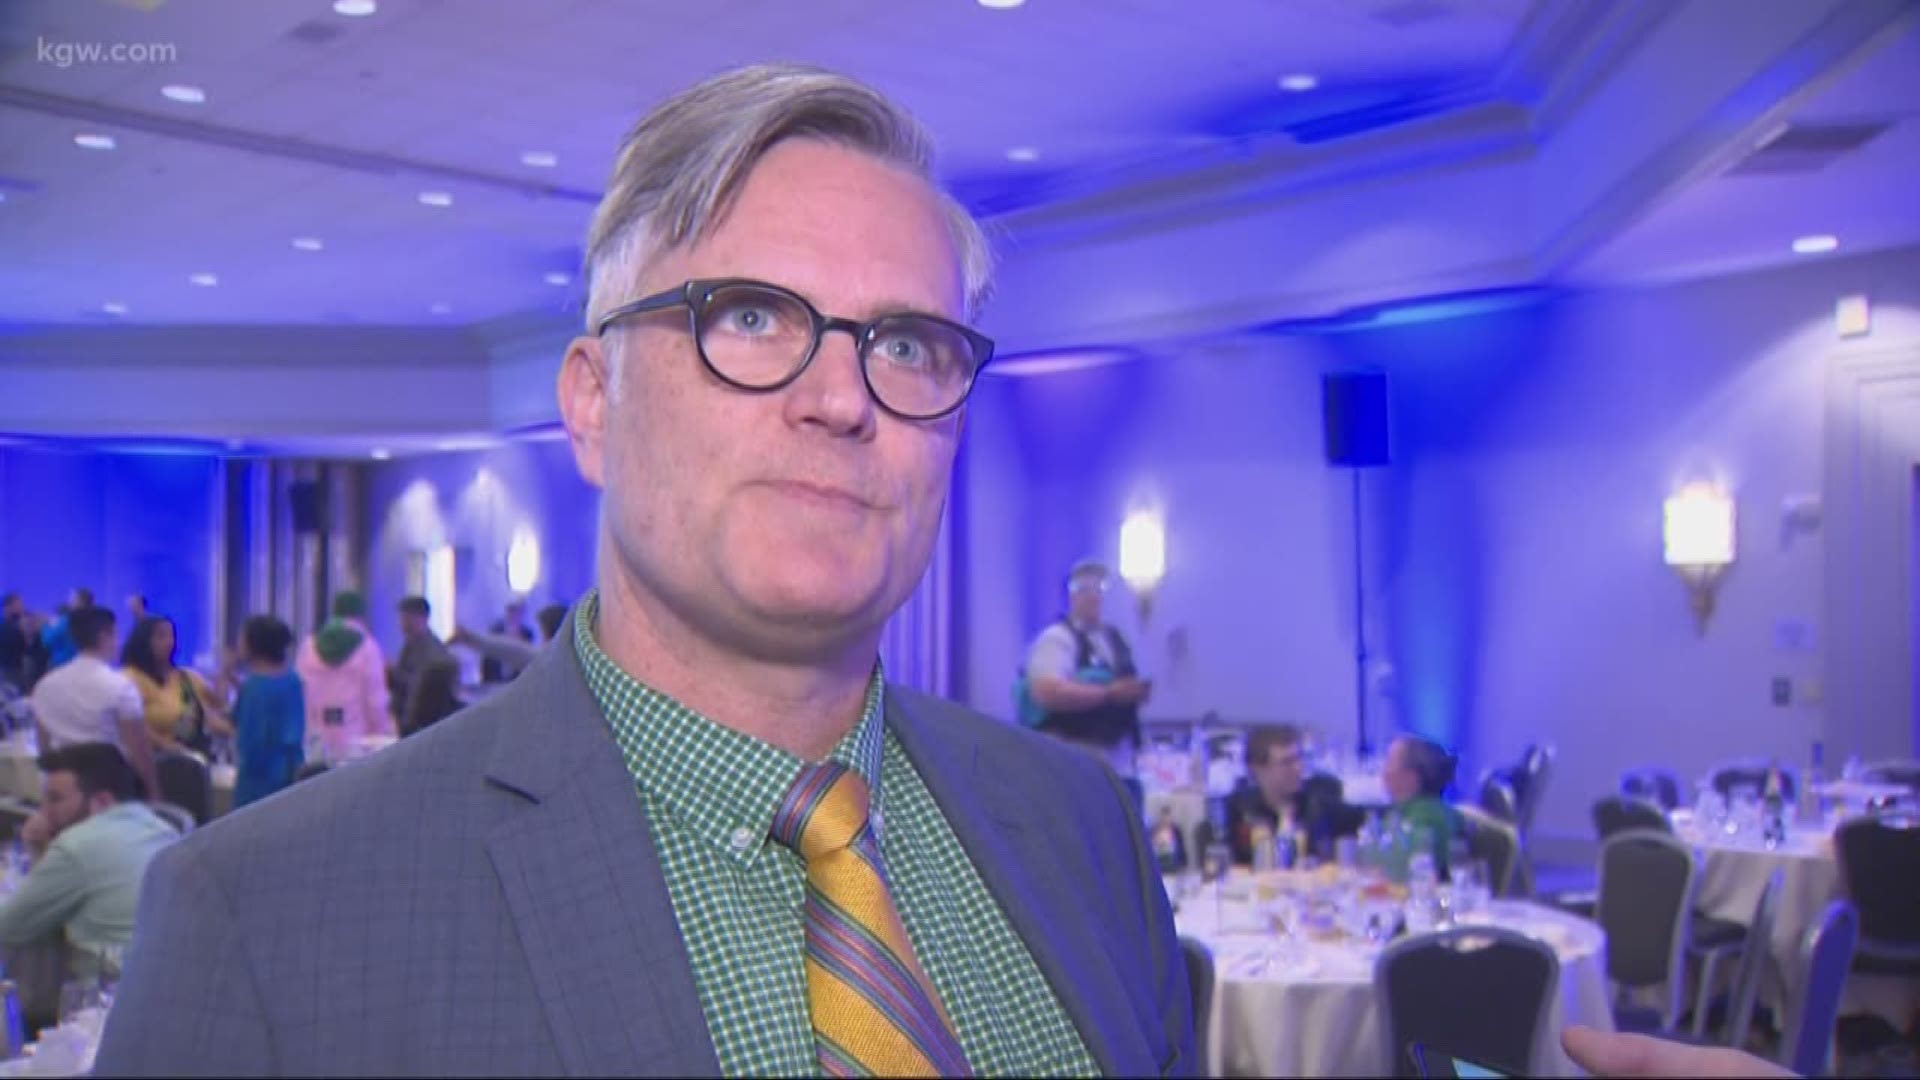 Former Portland Mayor Sam Adams is back in the city after facing controversy while in office and then allegations of sexual harassment in 2017. On Sunday, he was hon